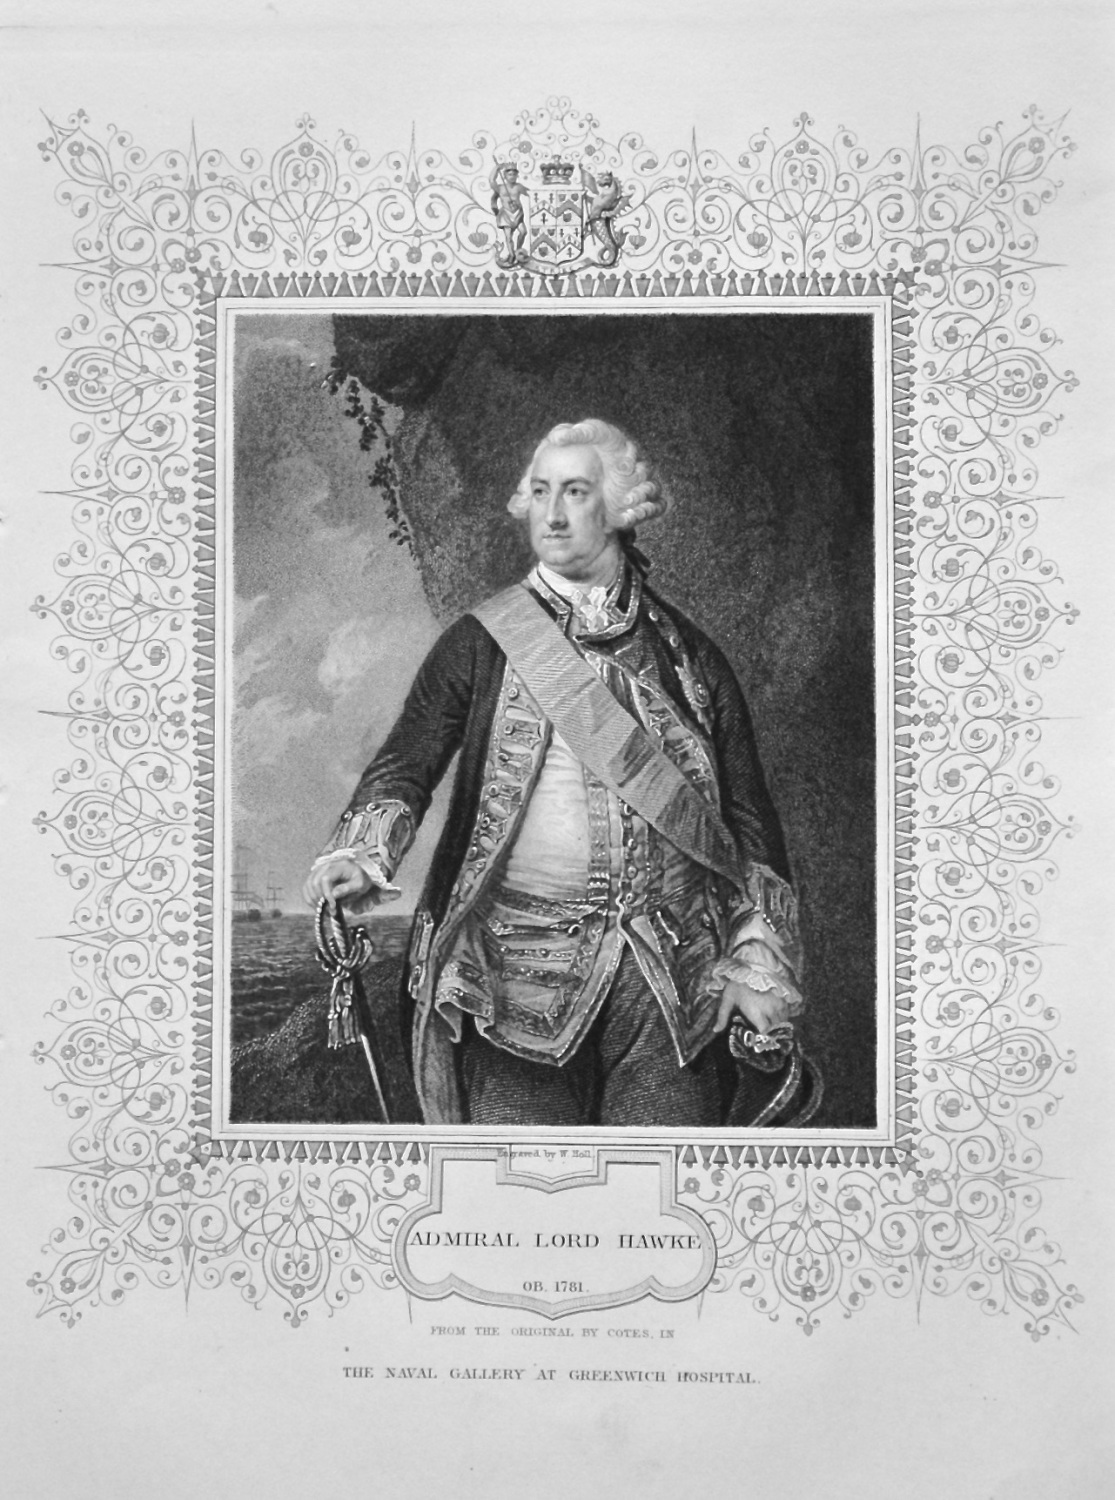 Admiral Lord Hawke. OB. 1781. From the original by Cotes, in The Naval Gall